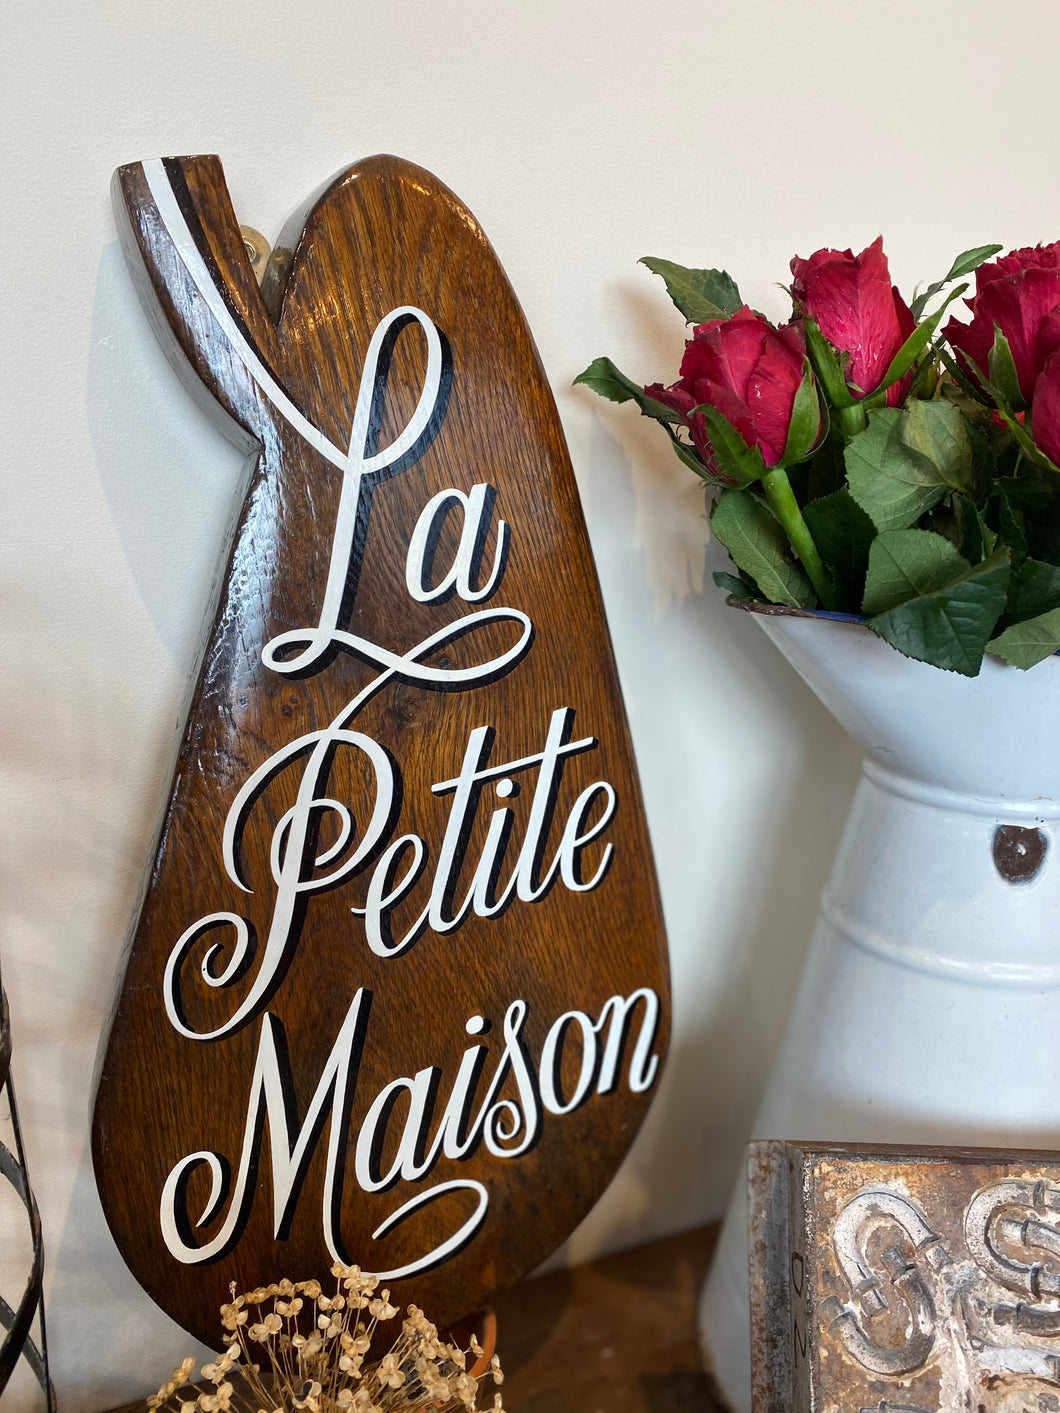 French hand painted sign Le Petite Maison on wood